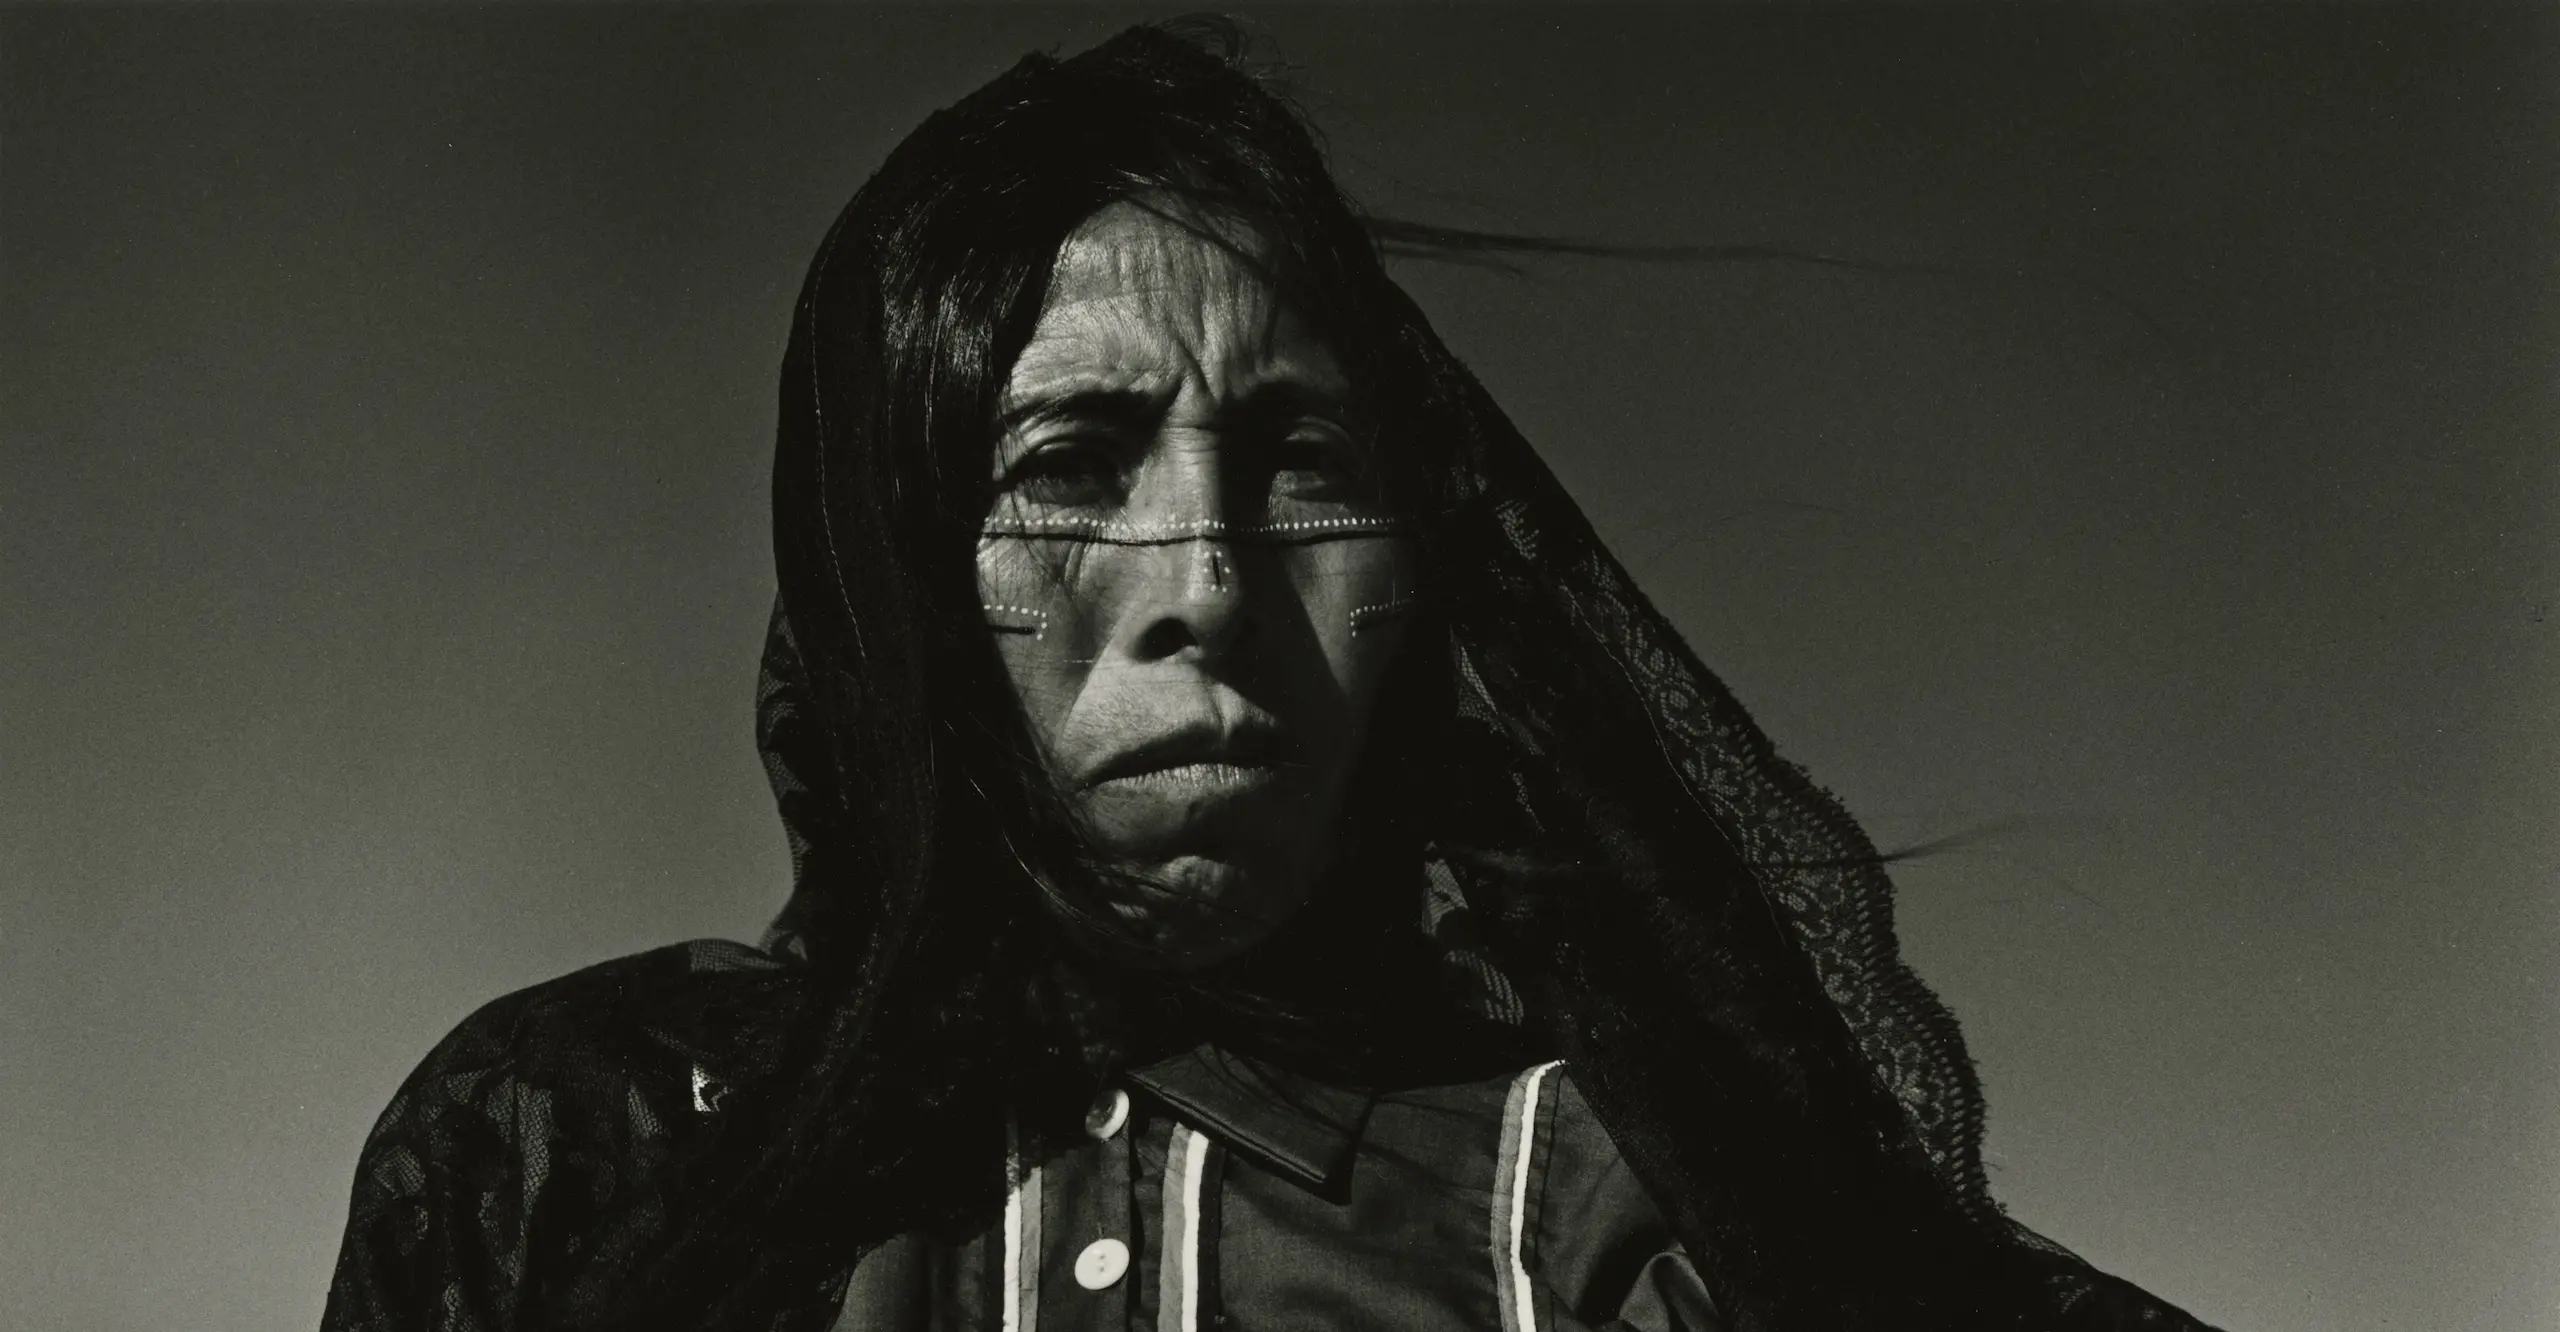 Black and white portrait photograph of a woman with indigenous paintings on her face and a black veil over her head.